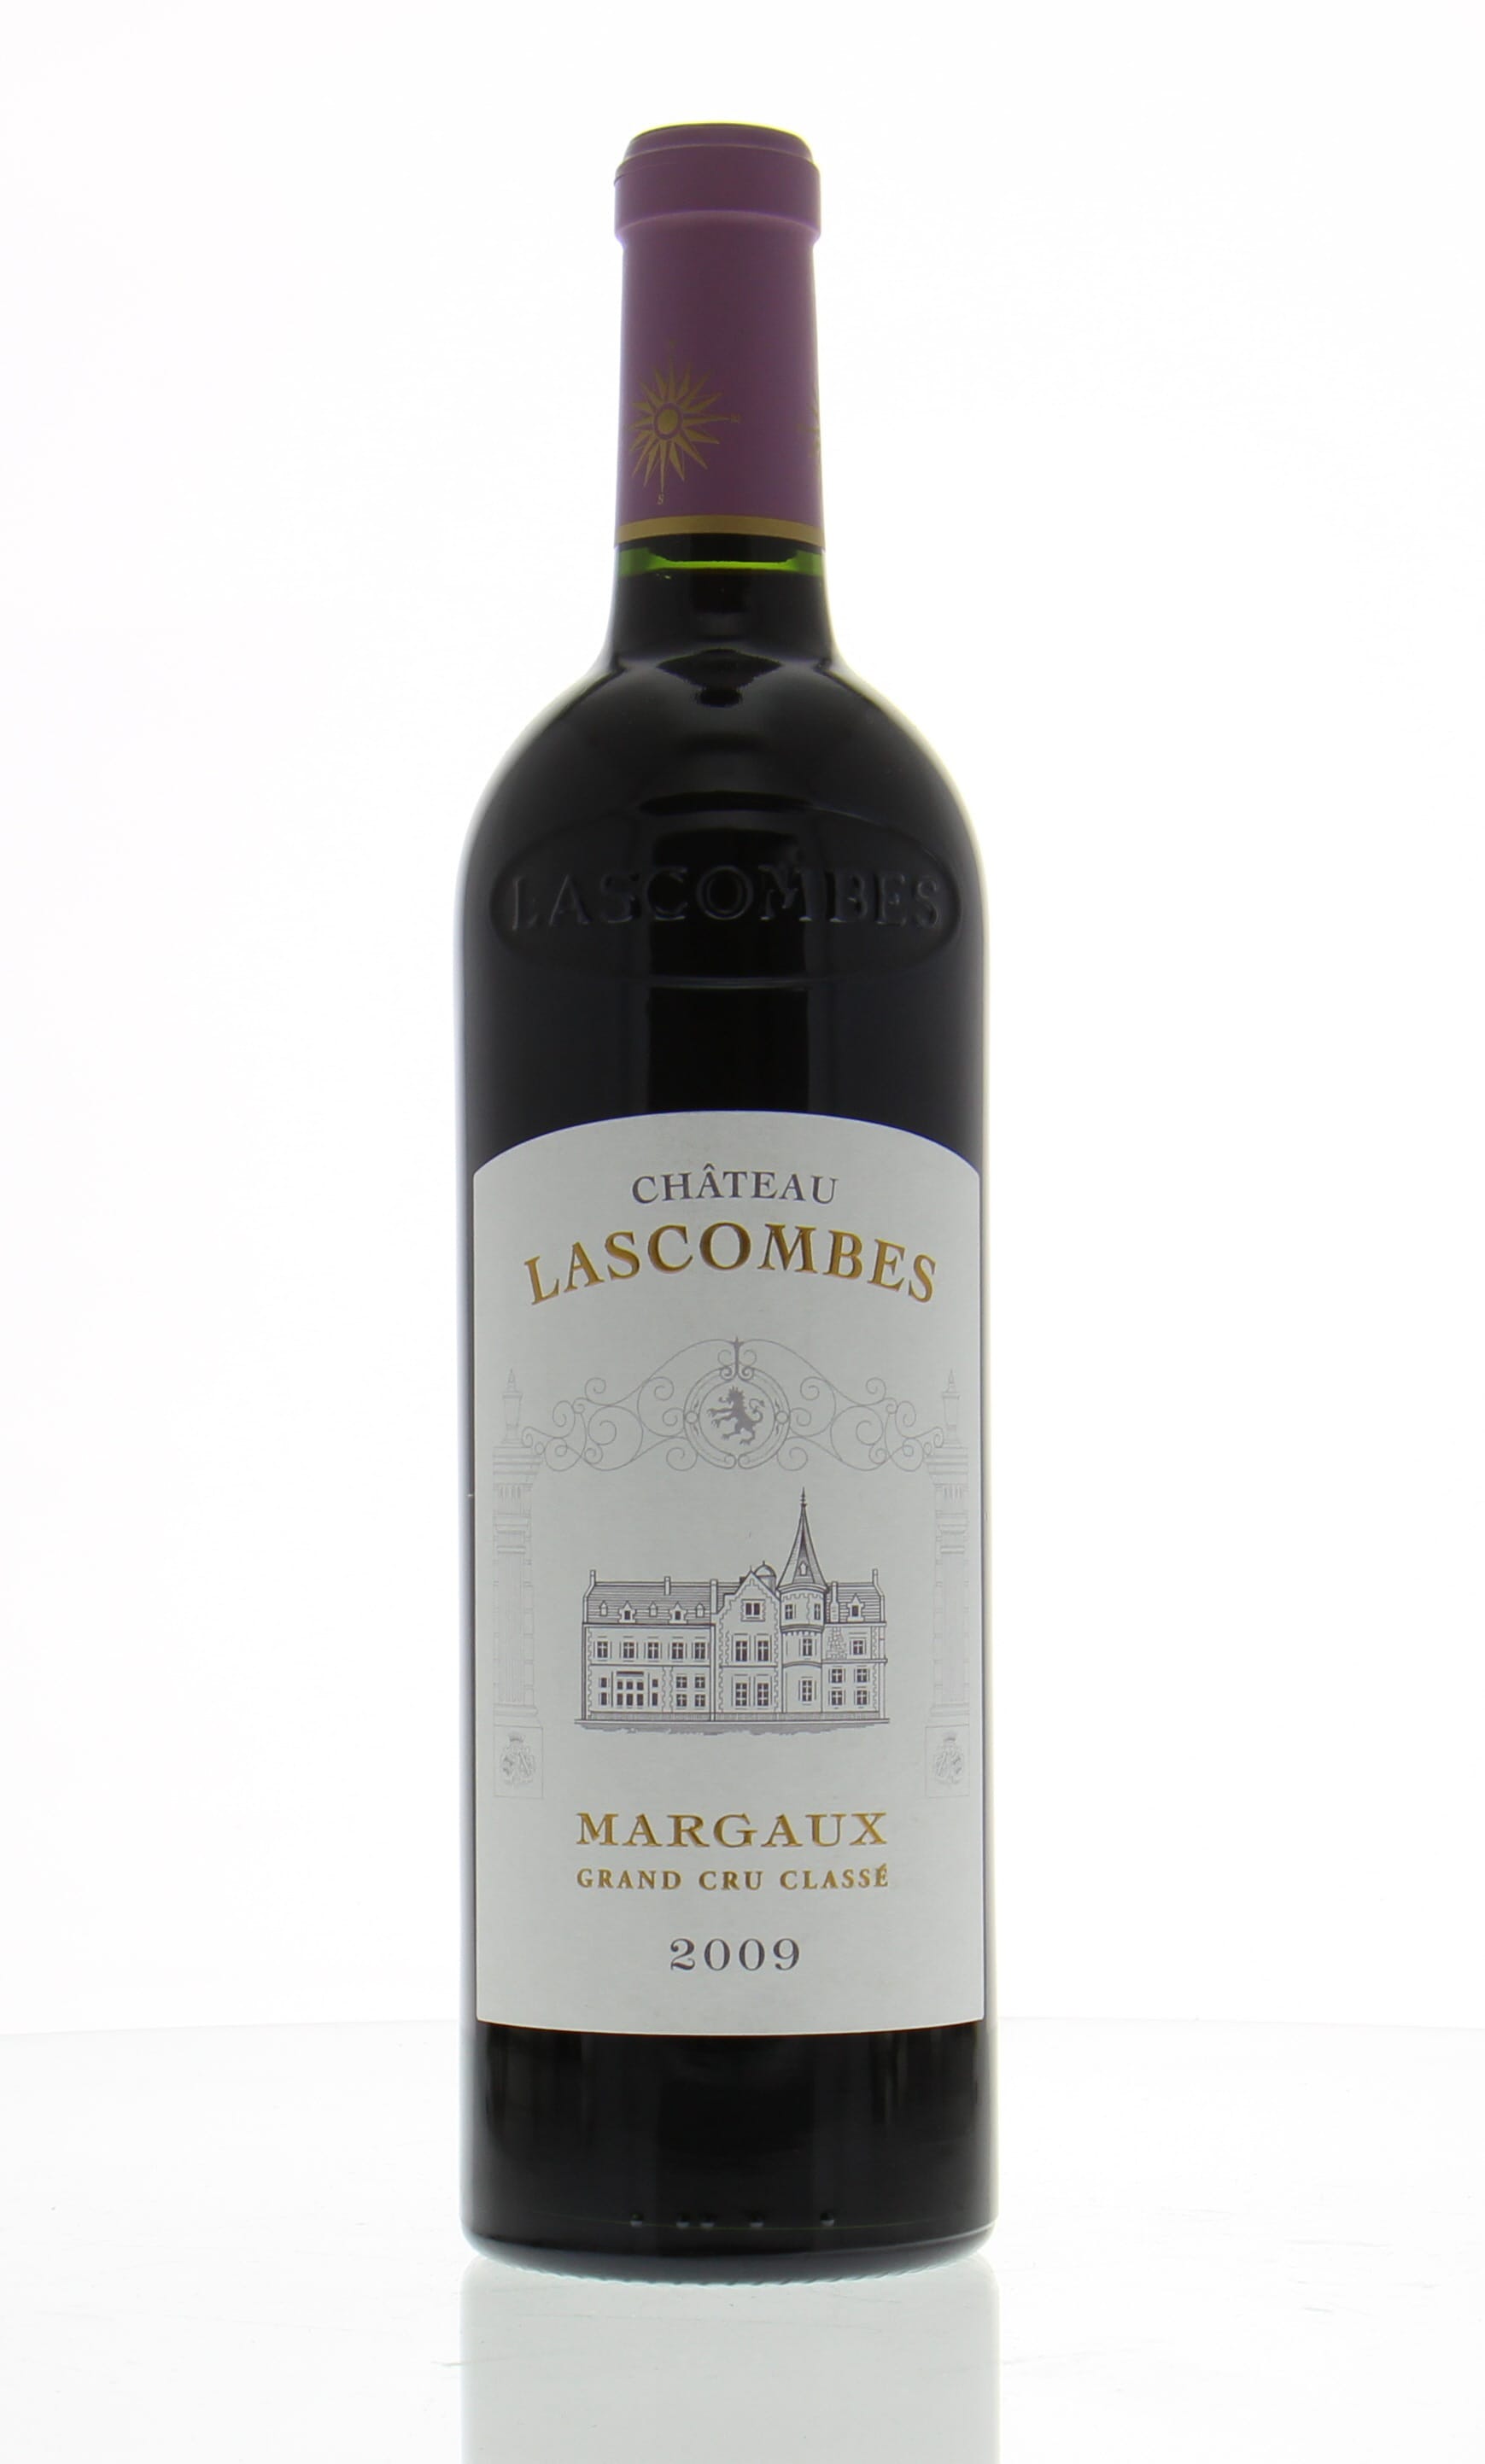 Chateau Lascombes - Chateau Lascombes 2009 From Original Wooden Case